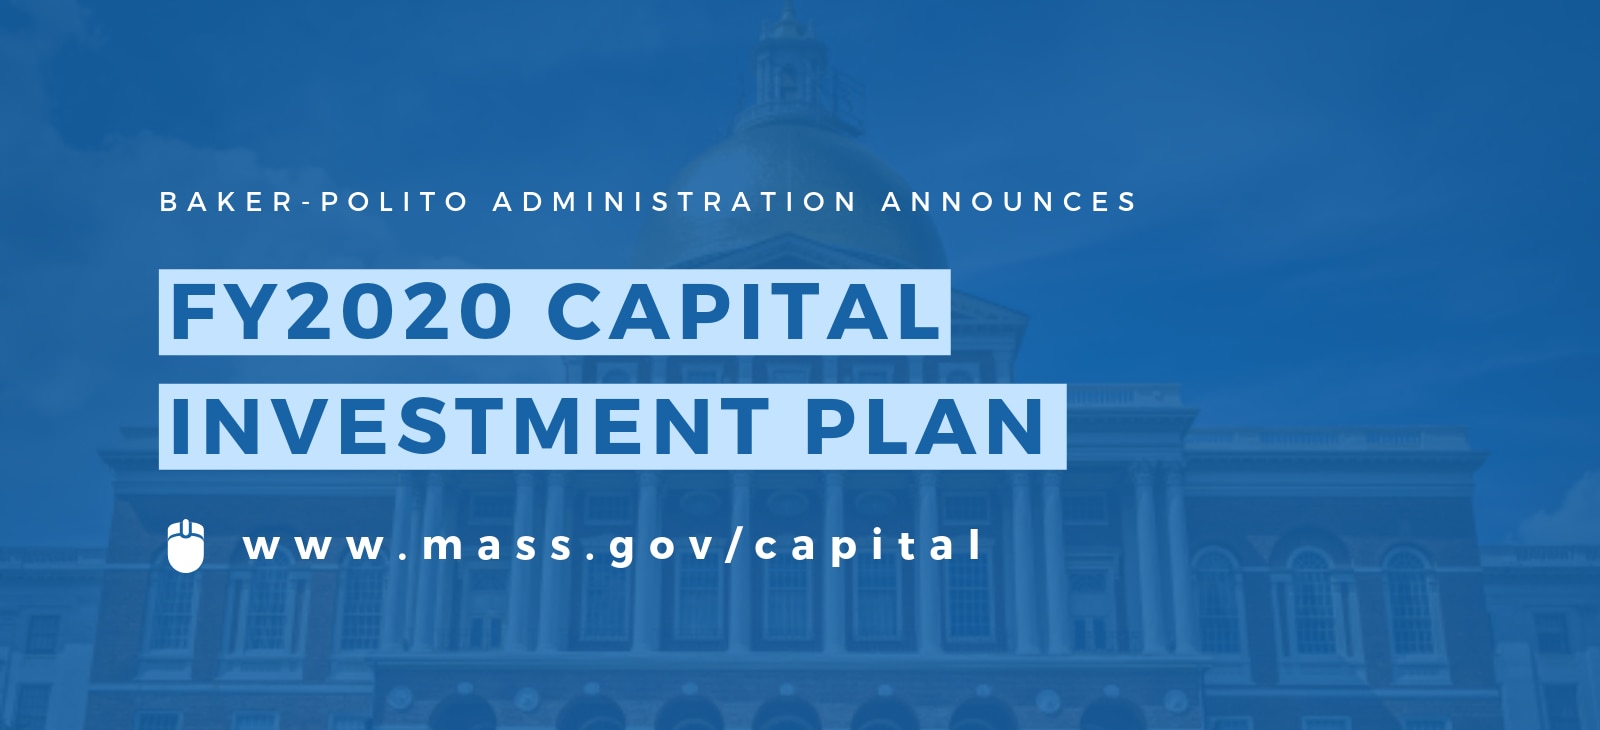 Baker-Polito Administration Announces Fiscal Year 2020 Capital Investment Plan